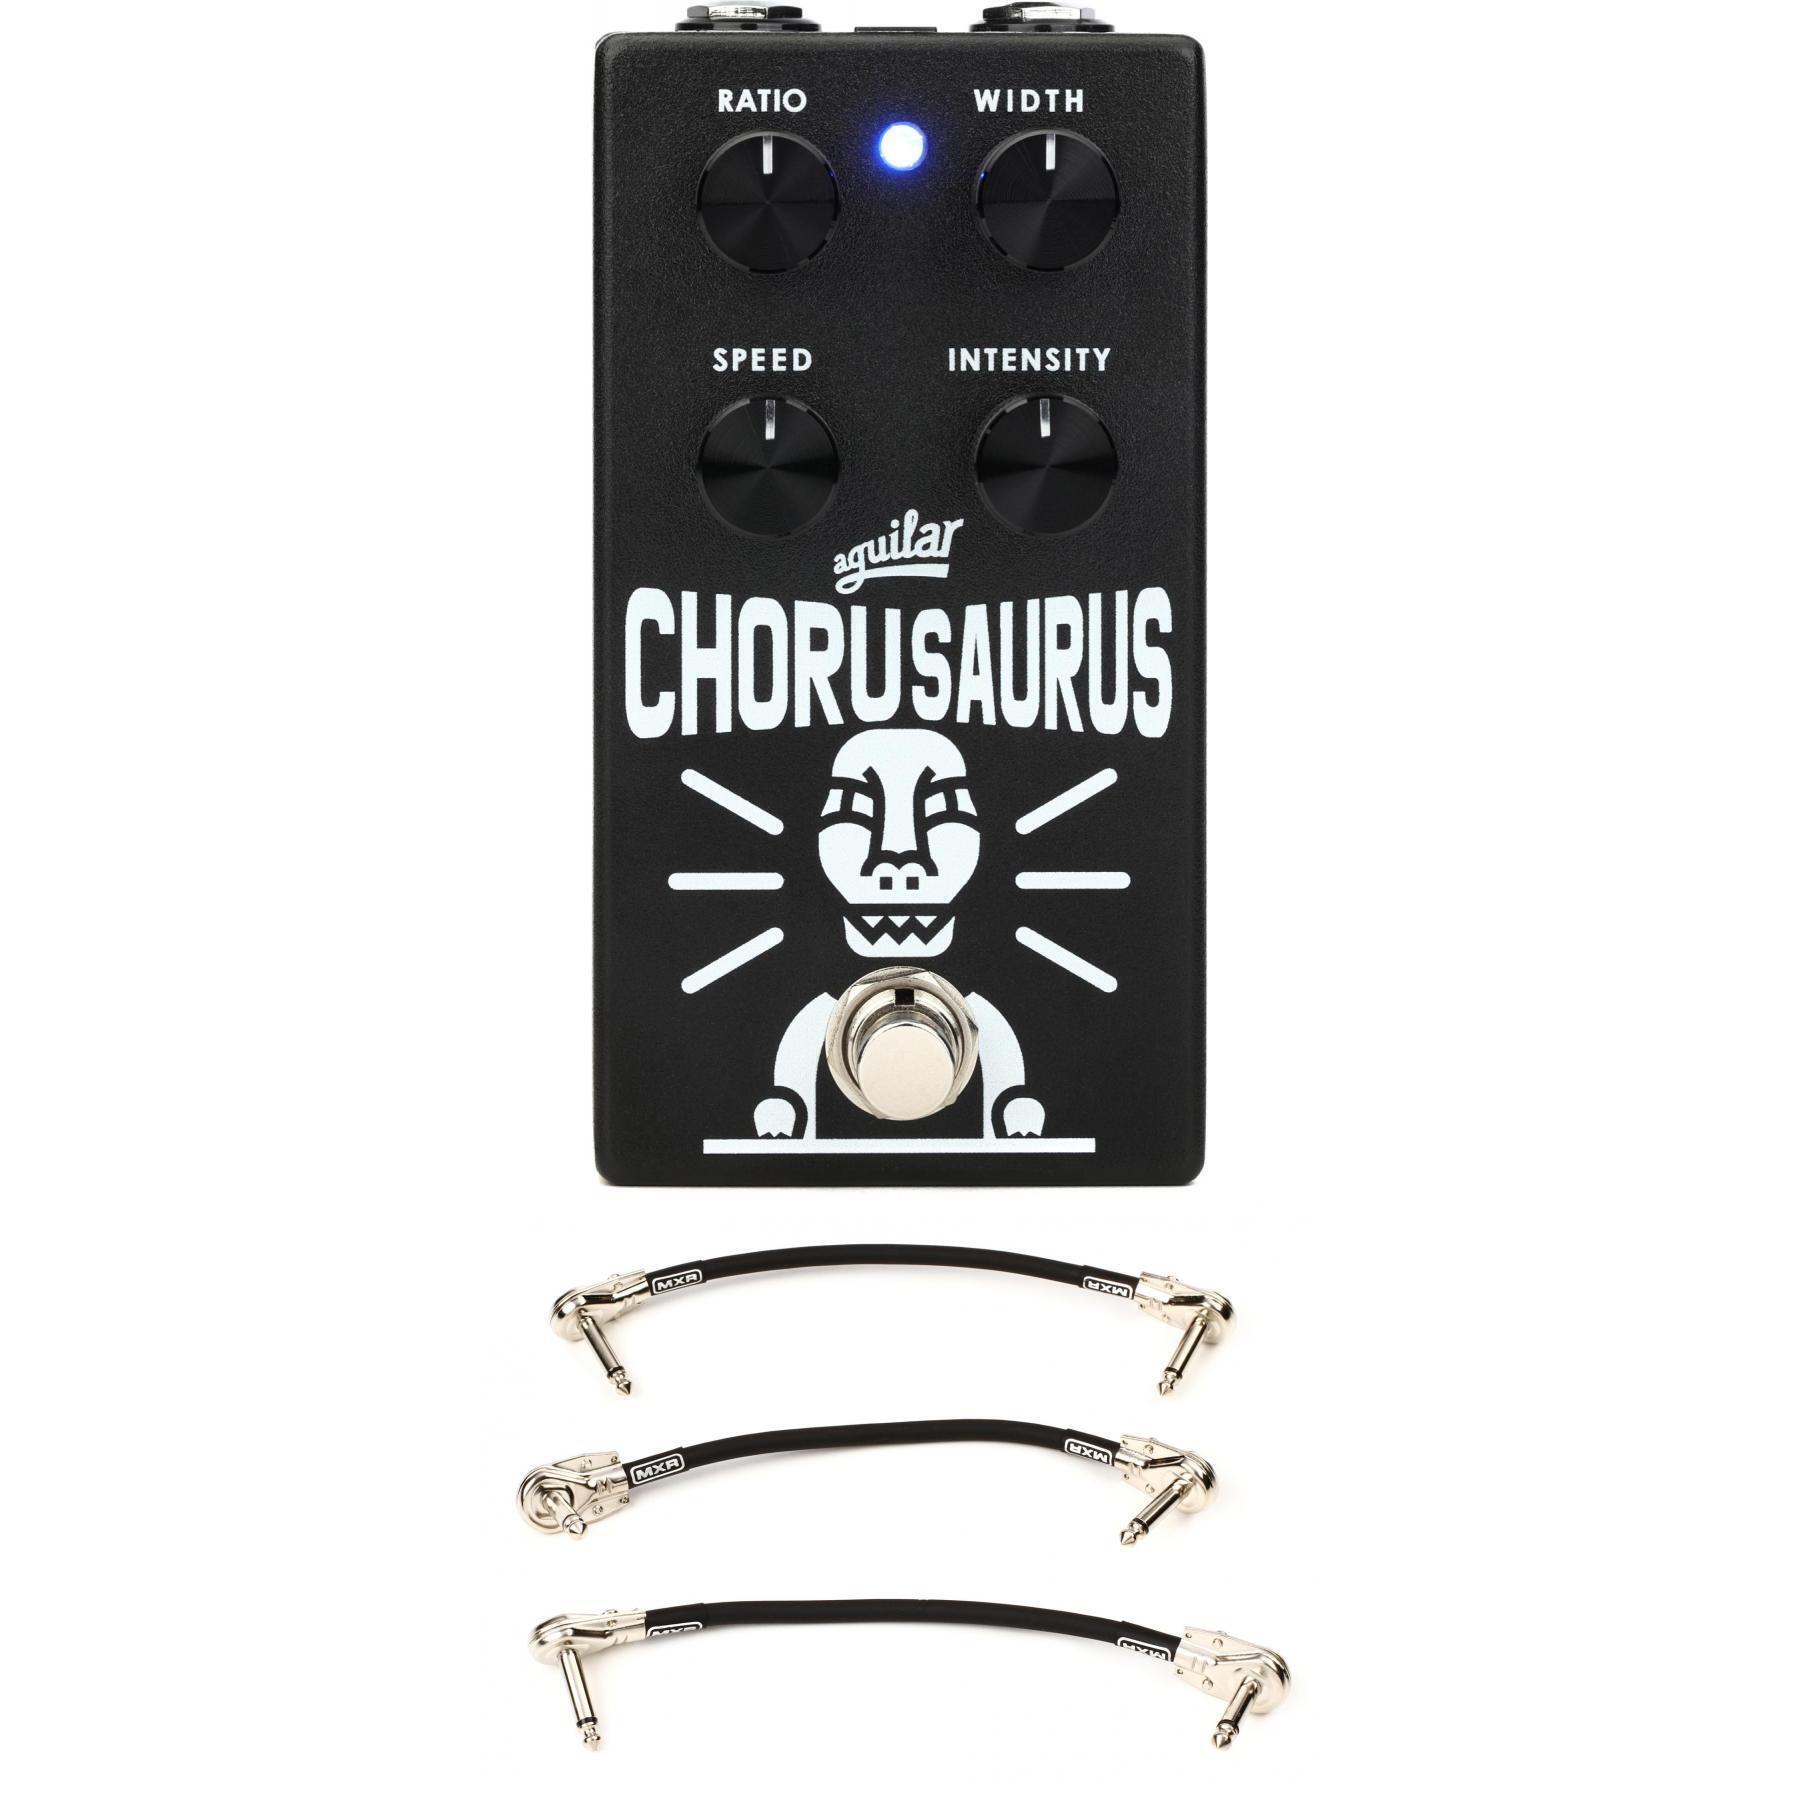 Aguilar Chorusaurus V2 Bass Chorus Pedal with 3 Patch Cables